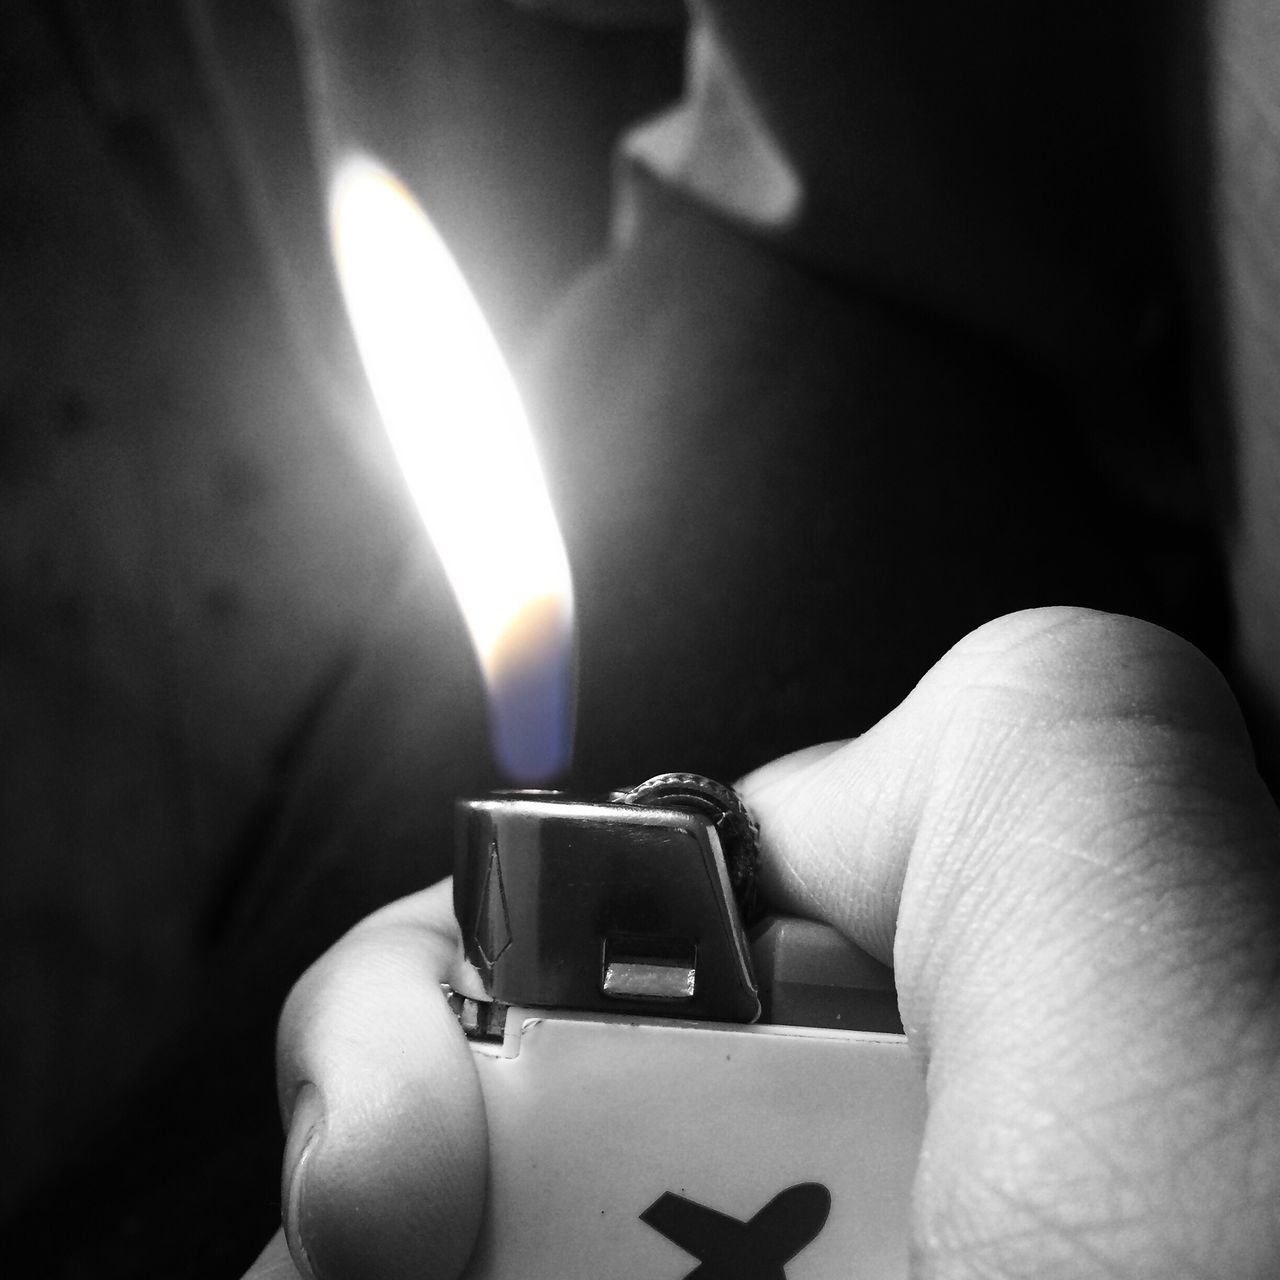 human hand, human body part, one person, burning, holding, human finger, flame, cigarette lighter, close-up, indoors, real people, heat - temperature, focus on foreground, lifestyles, night, adult, people